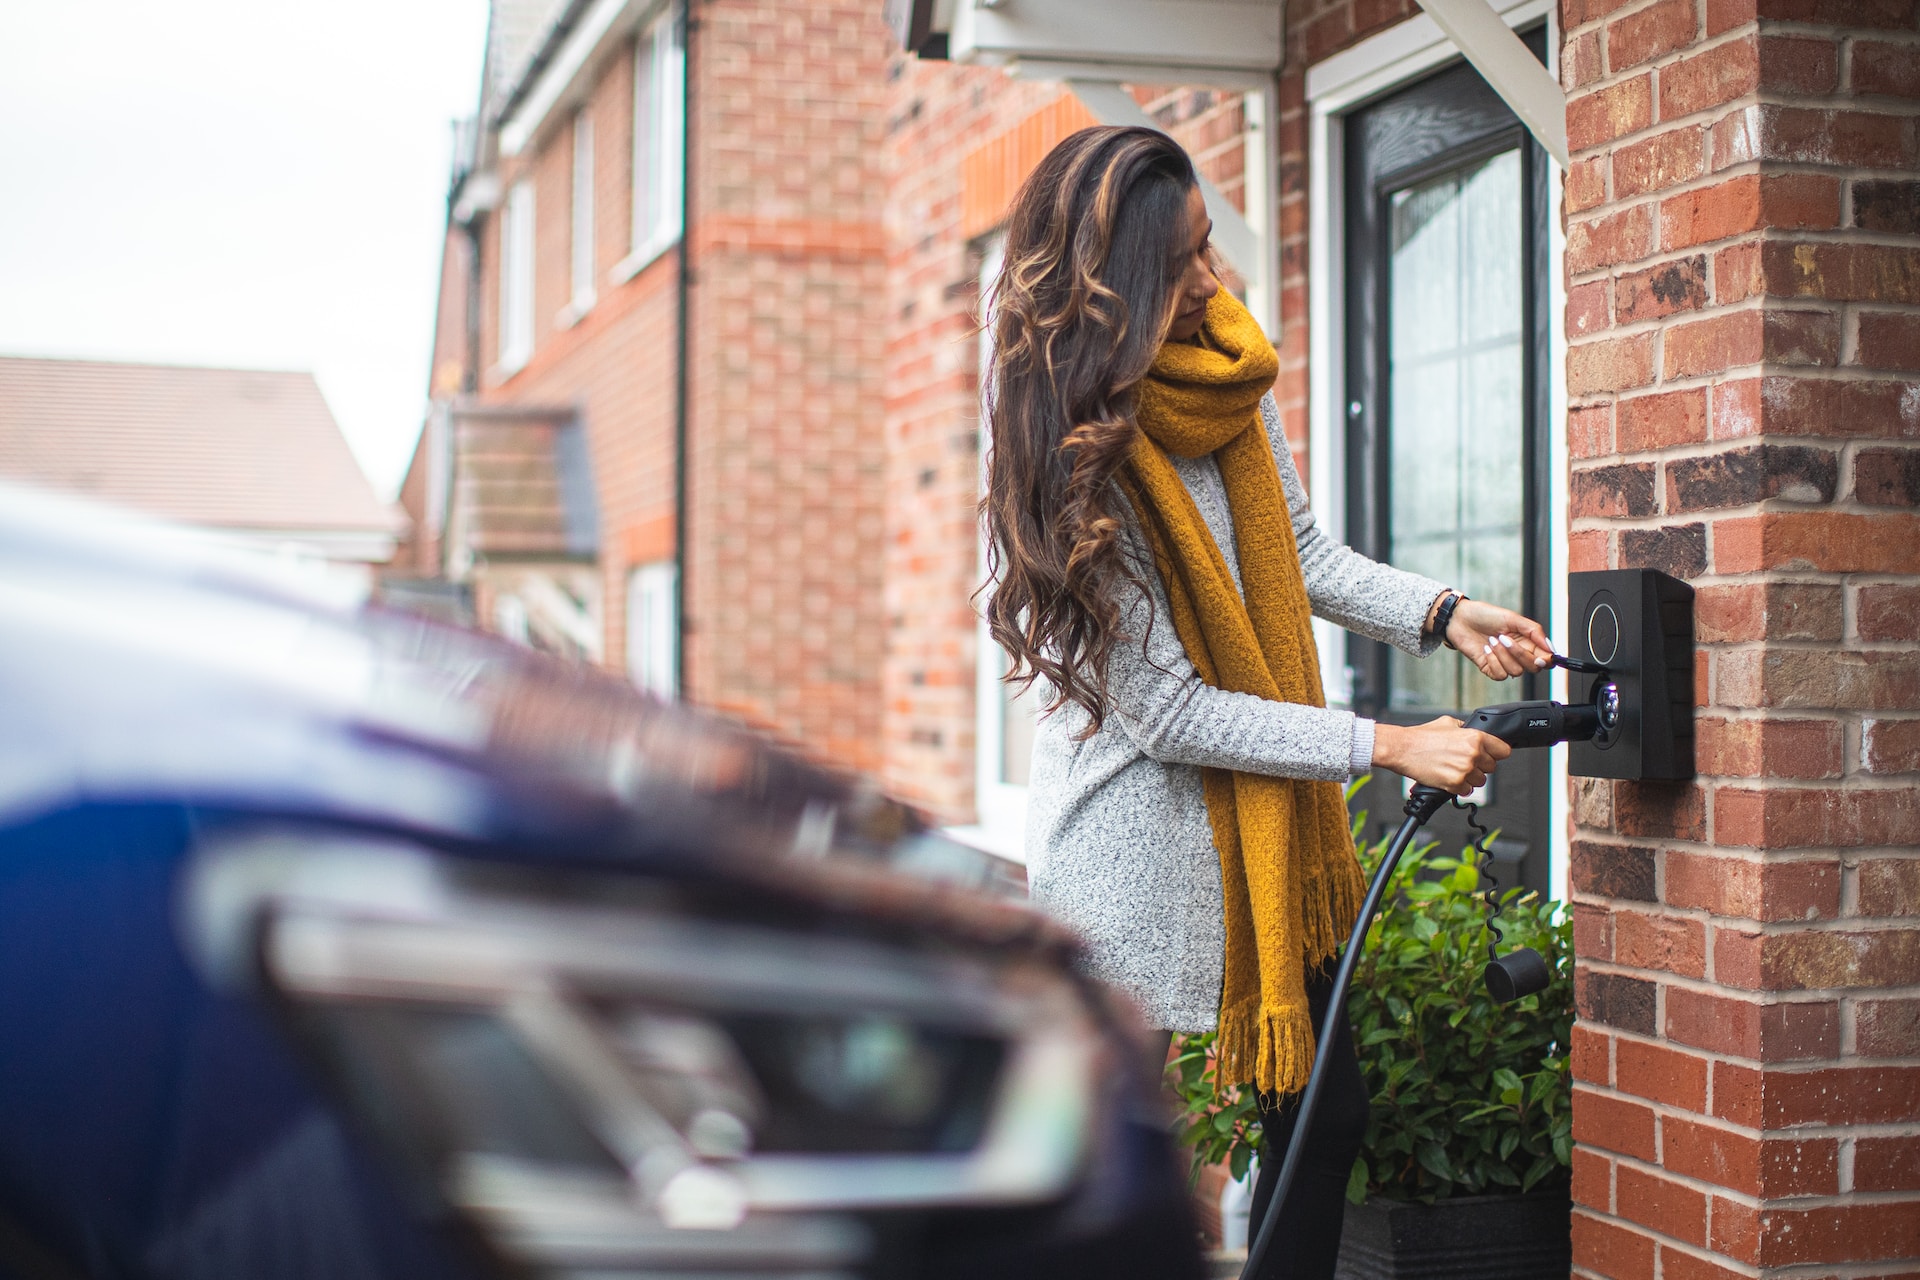 How to benefit from Vehicle-To-Home charging